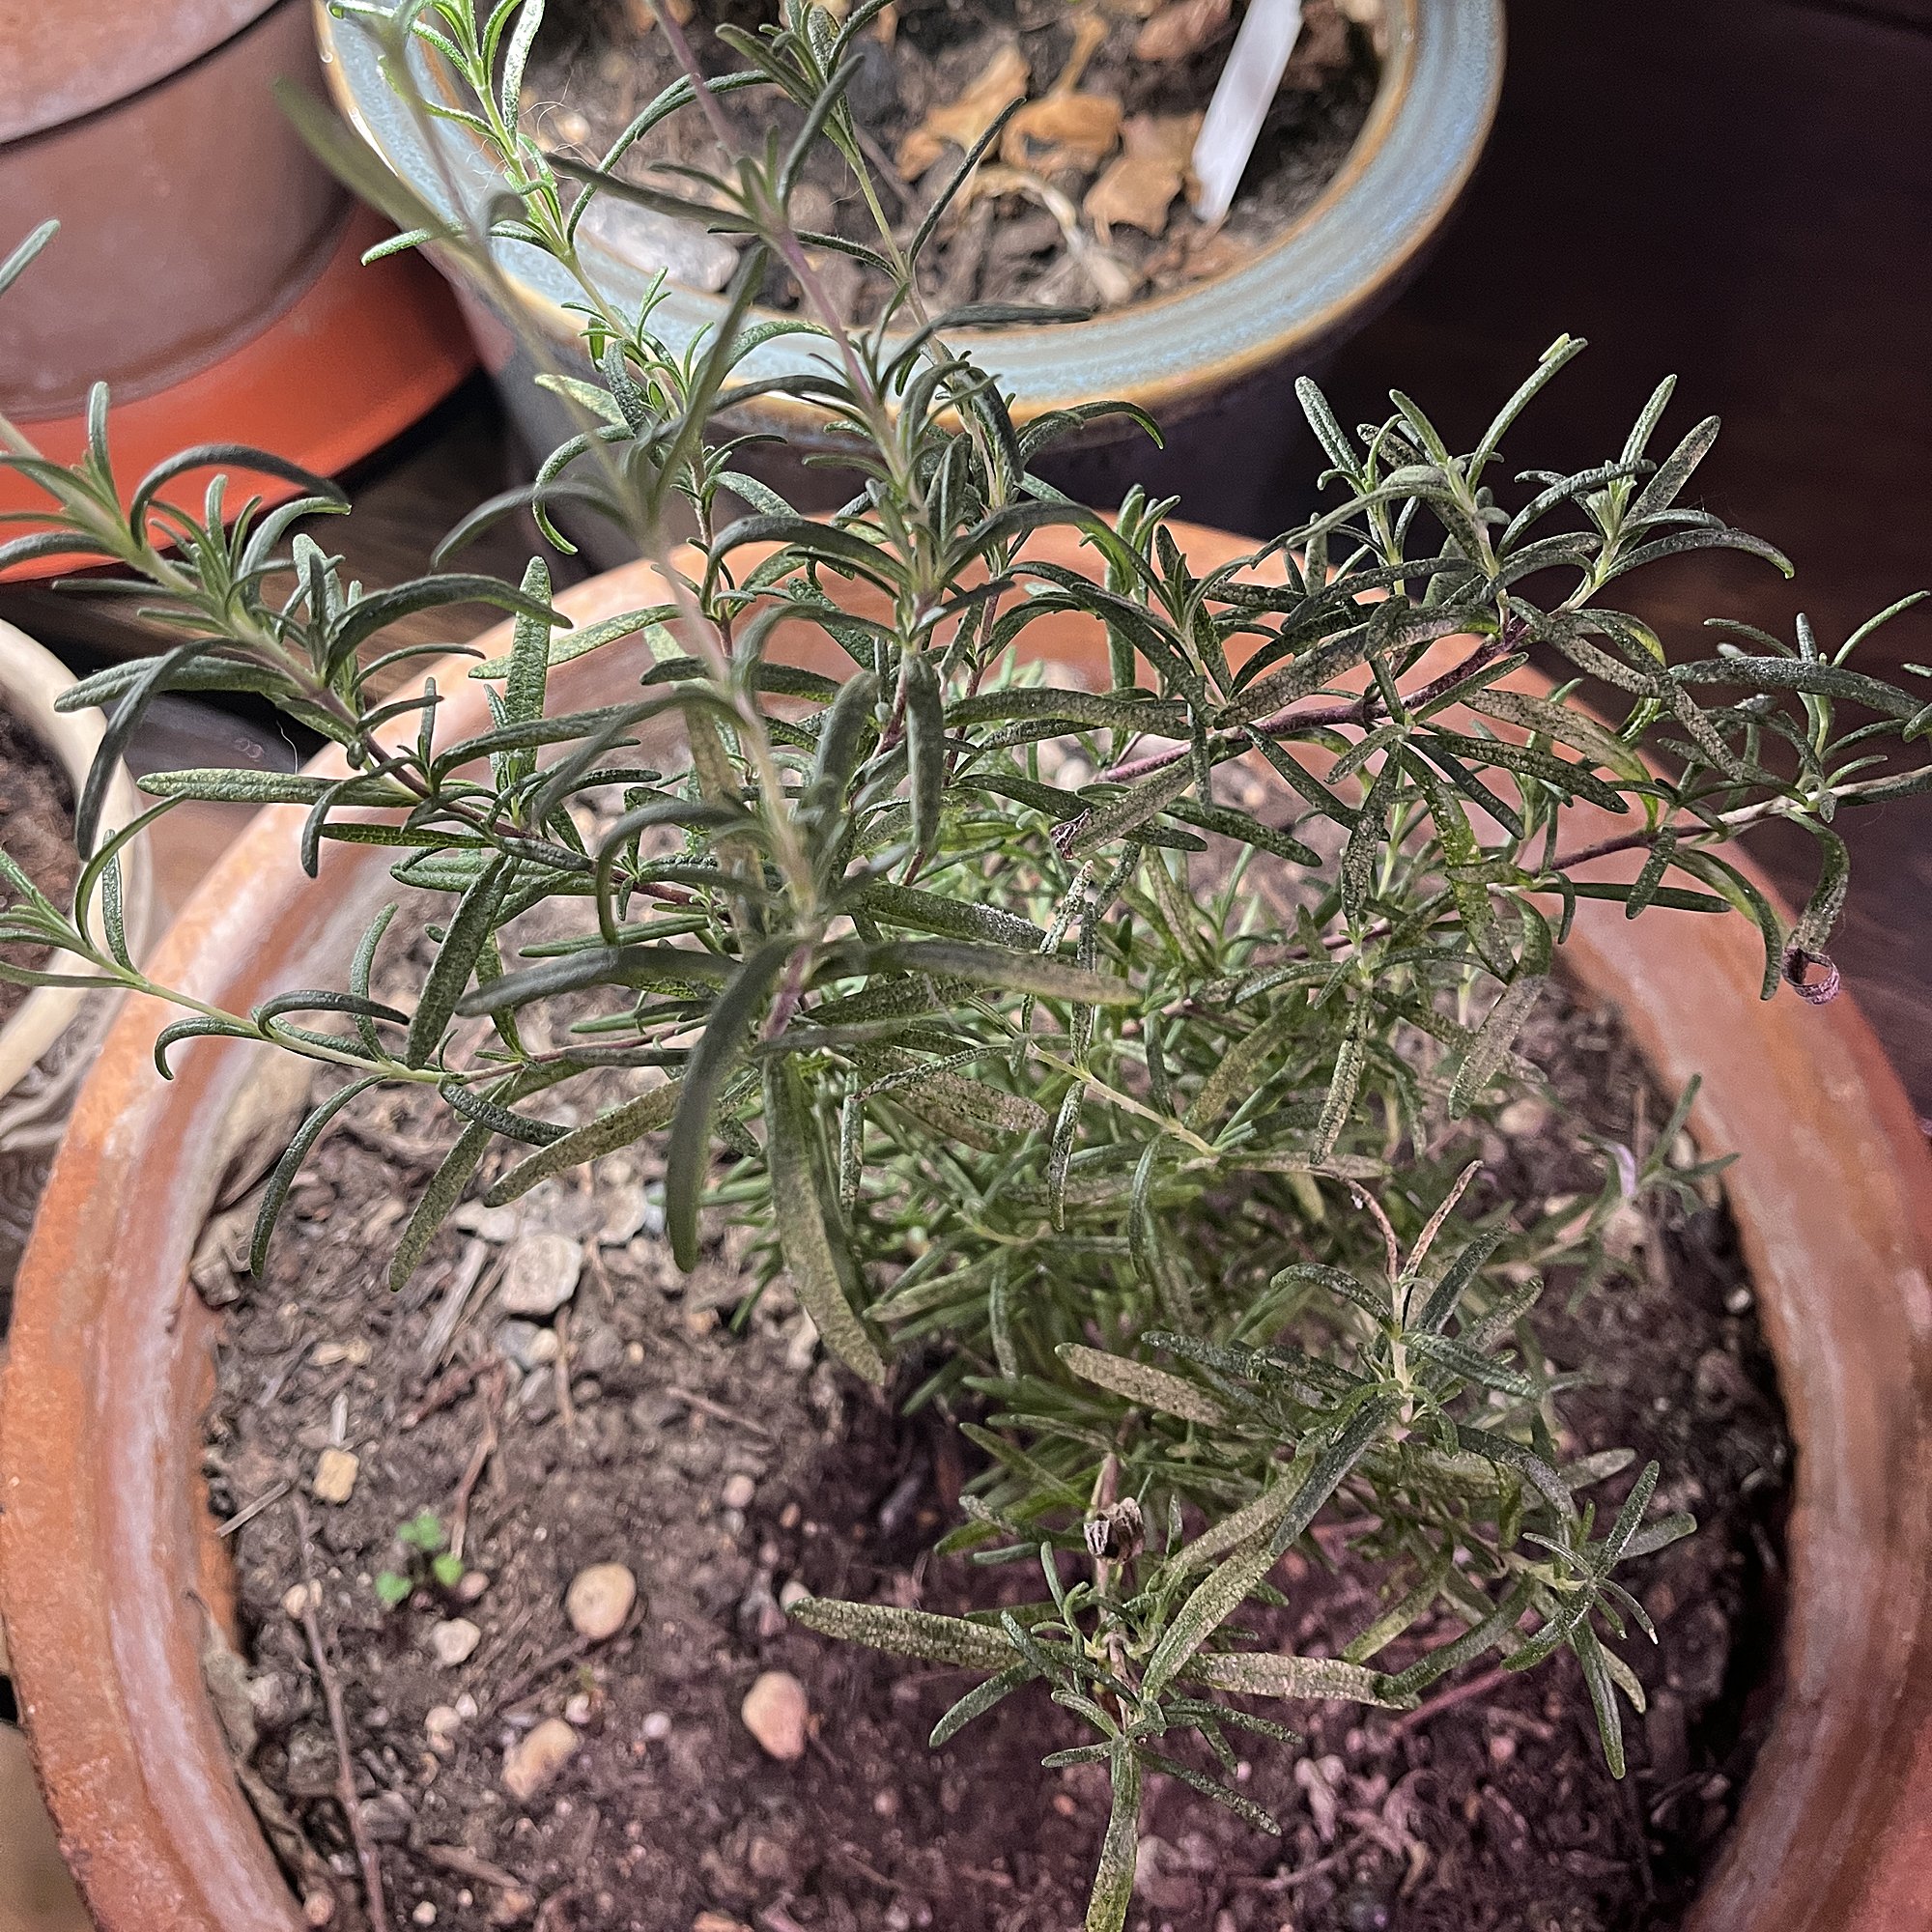 But the rosemary winters indoors.